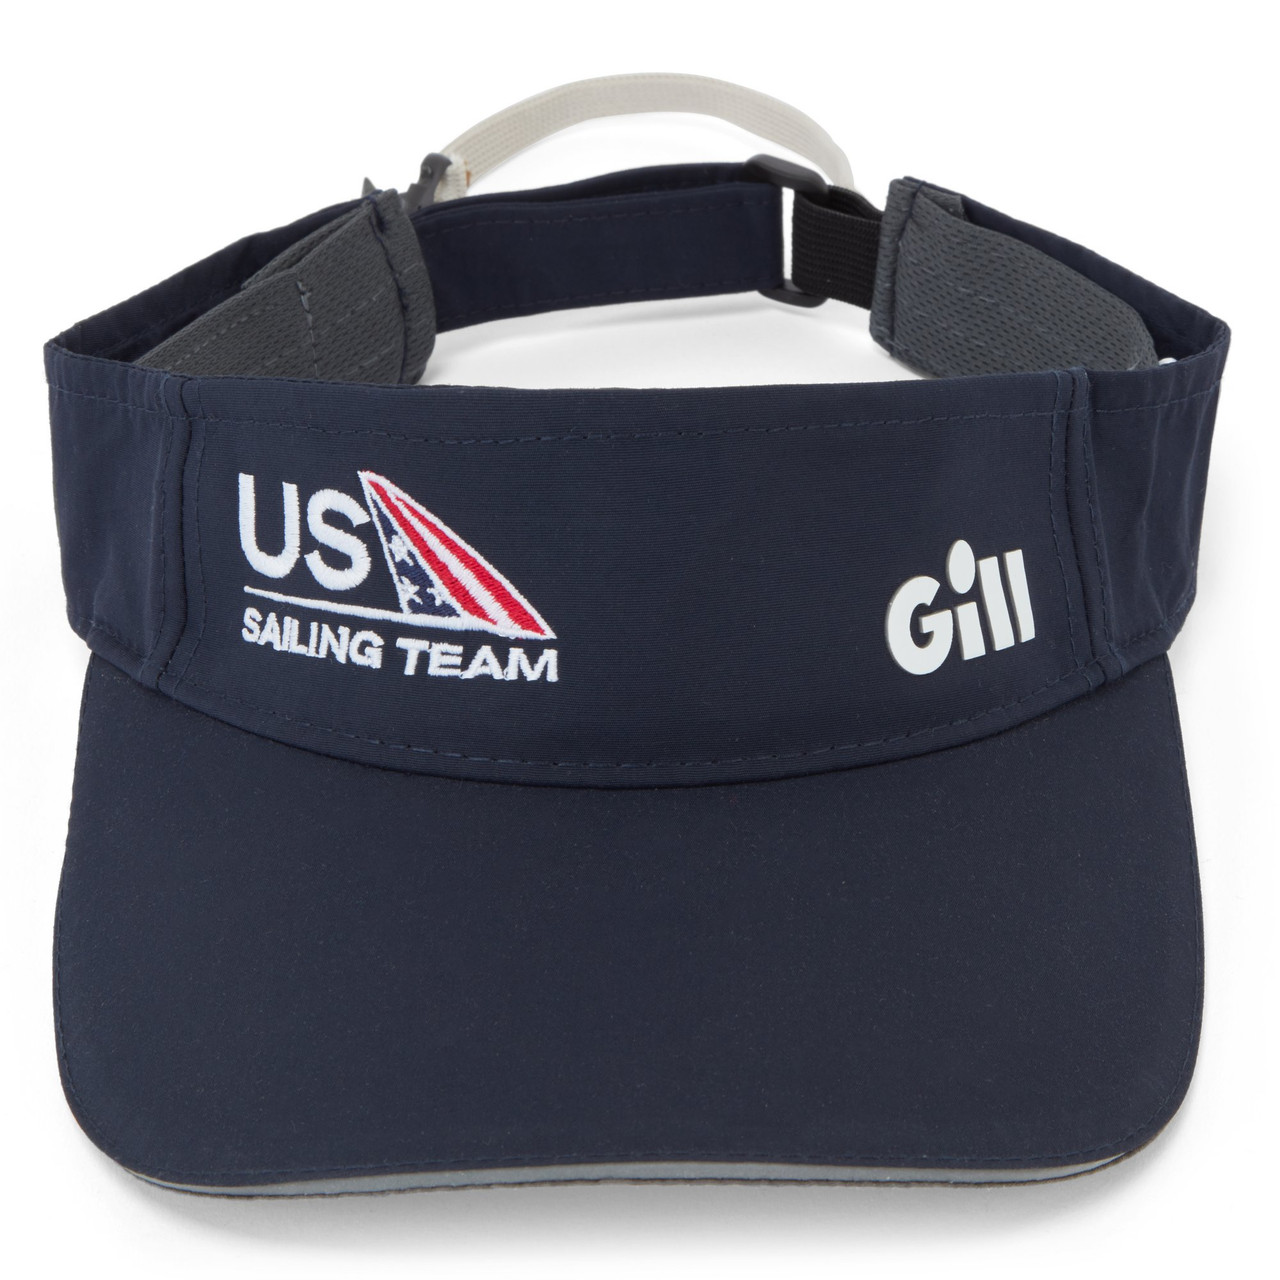 Gill Marine Official US Store - Pioneers of Technical Marine